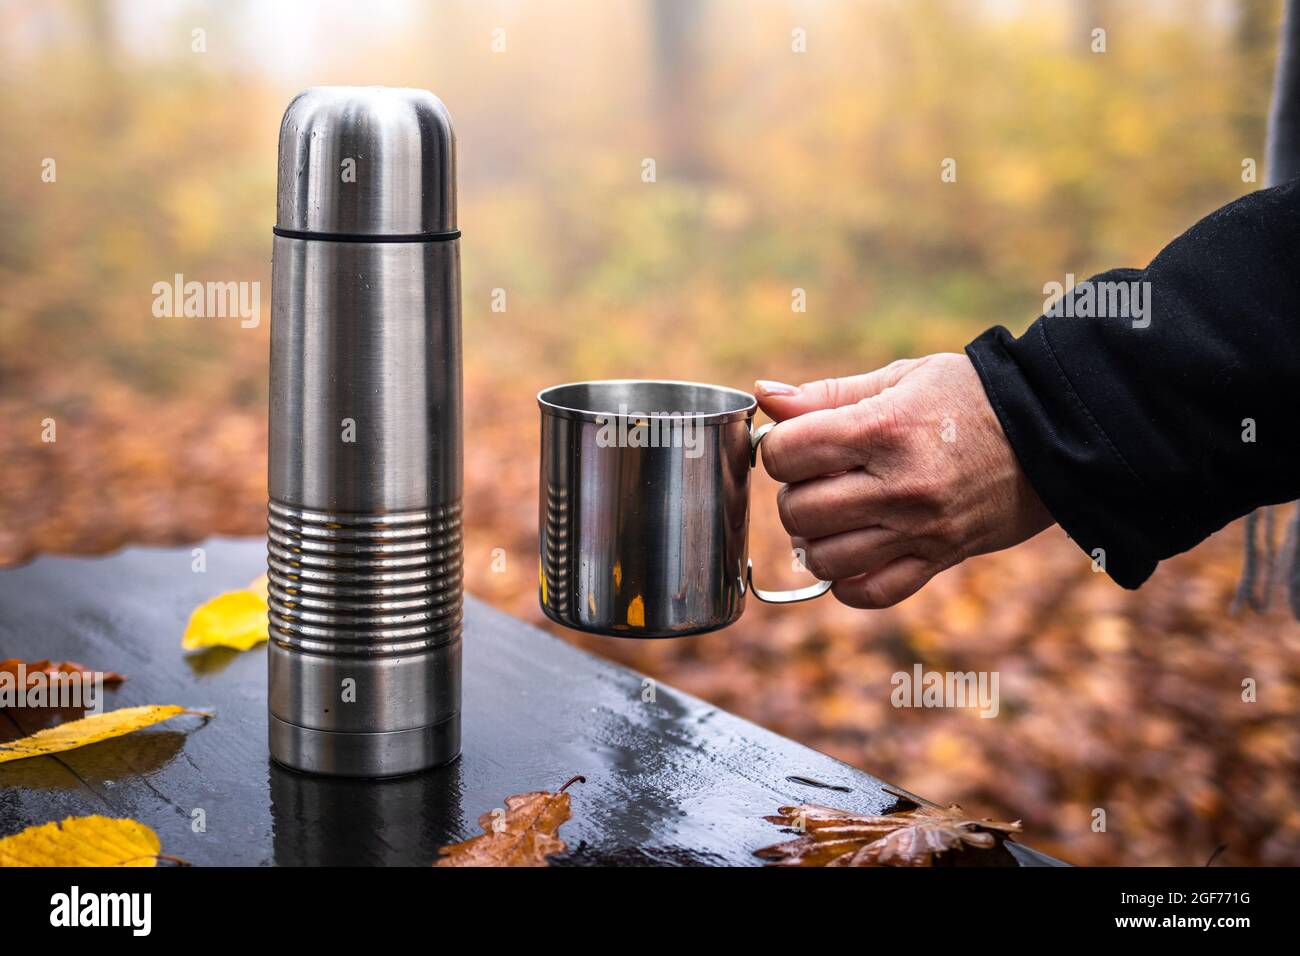 https://c8.alamy.com/comp/2GF771G/woman-holding-metal-cup-thermos-with-hot-drink-on-table-refreshment-during-hike-in-autumn-woodland-2GF771G.jpg